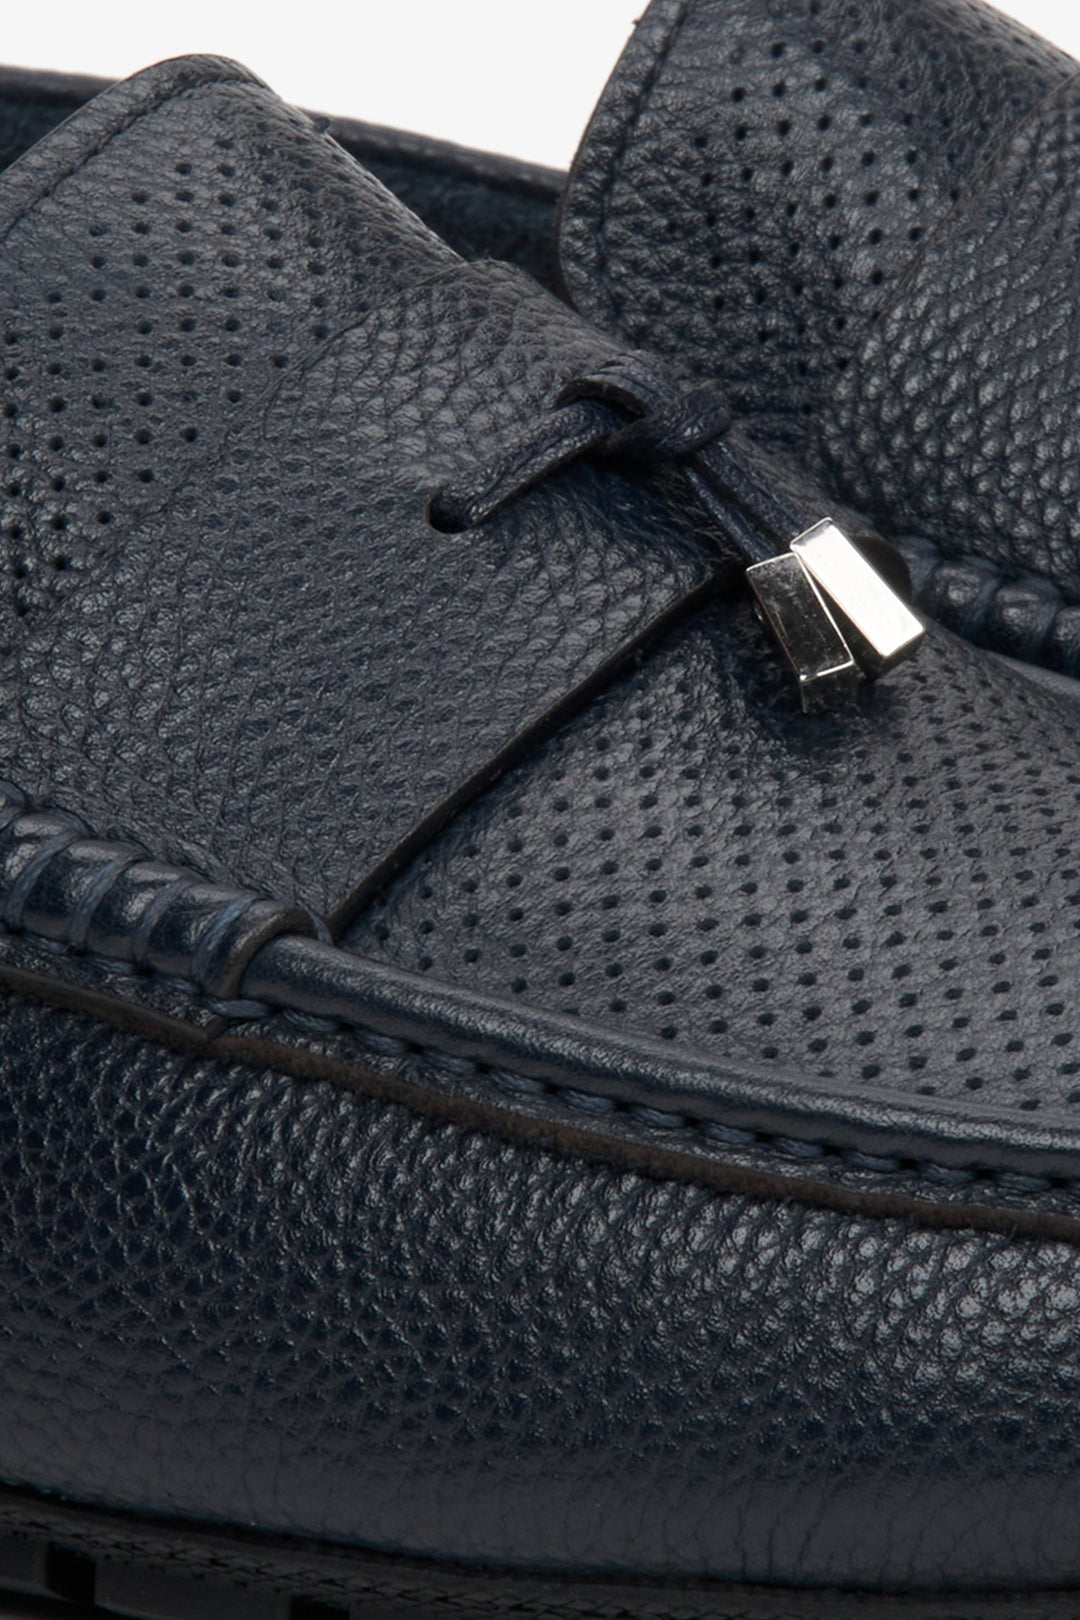 Men's leather loafers for fall in navy blue - close-up on the details.